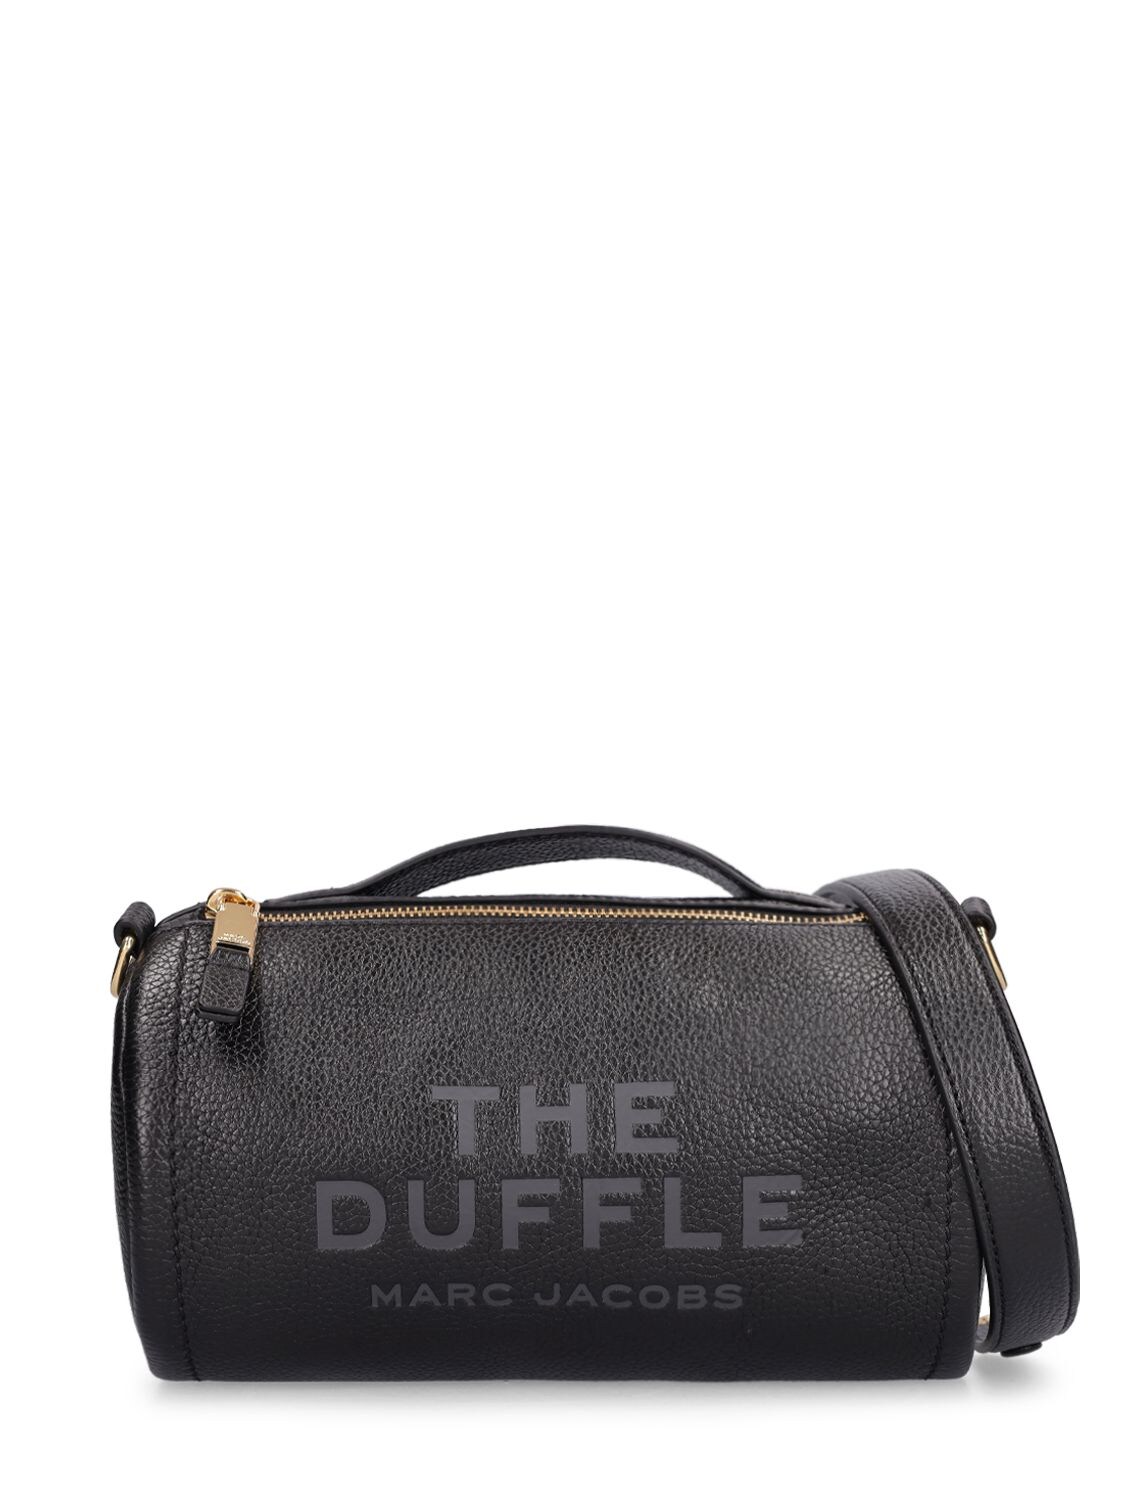 The Duffle Leather Bag – WOMEN > BAGS > SHOULDER BAGS